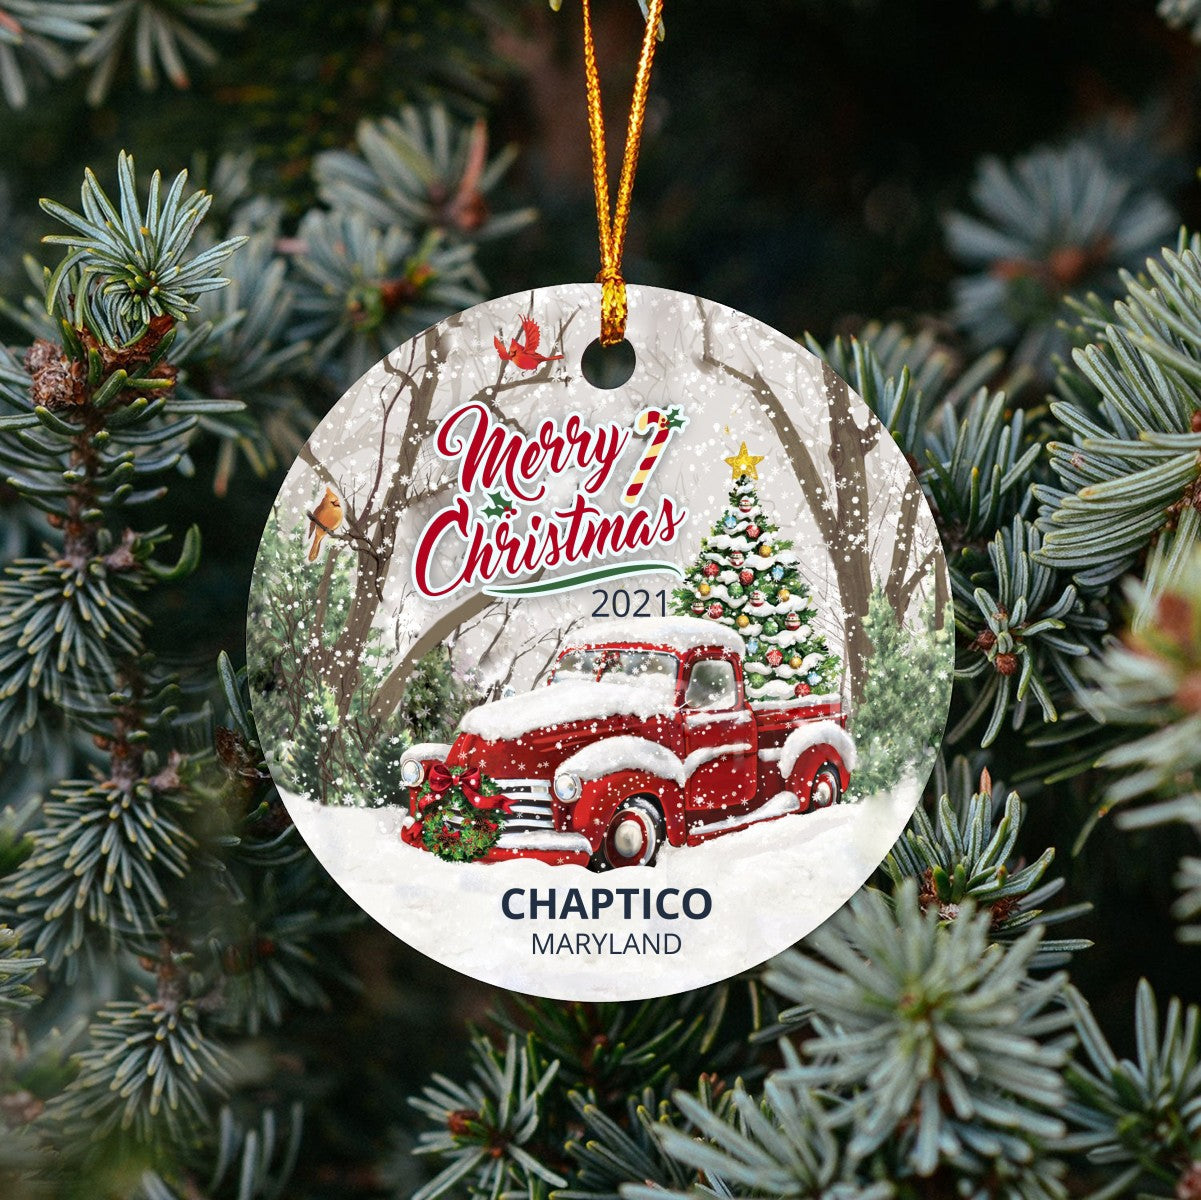 Christmas Tree Ornaments Chaptico - Ornament With Name City, State Chaptico Maryland MD Ornament - Red Truck Xmas Ornaments 3'' Plastic Gift For Family, Friend And Housewarming